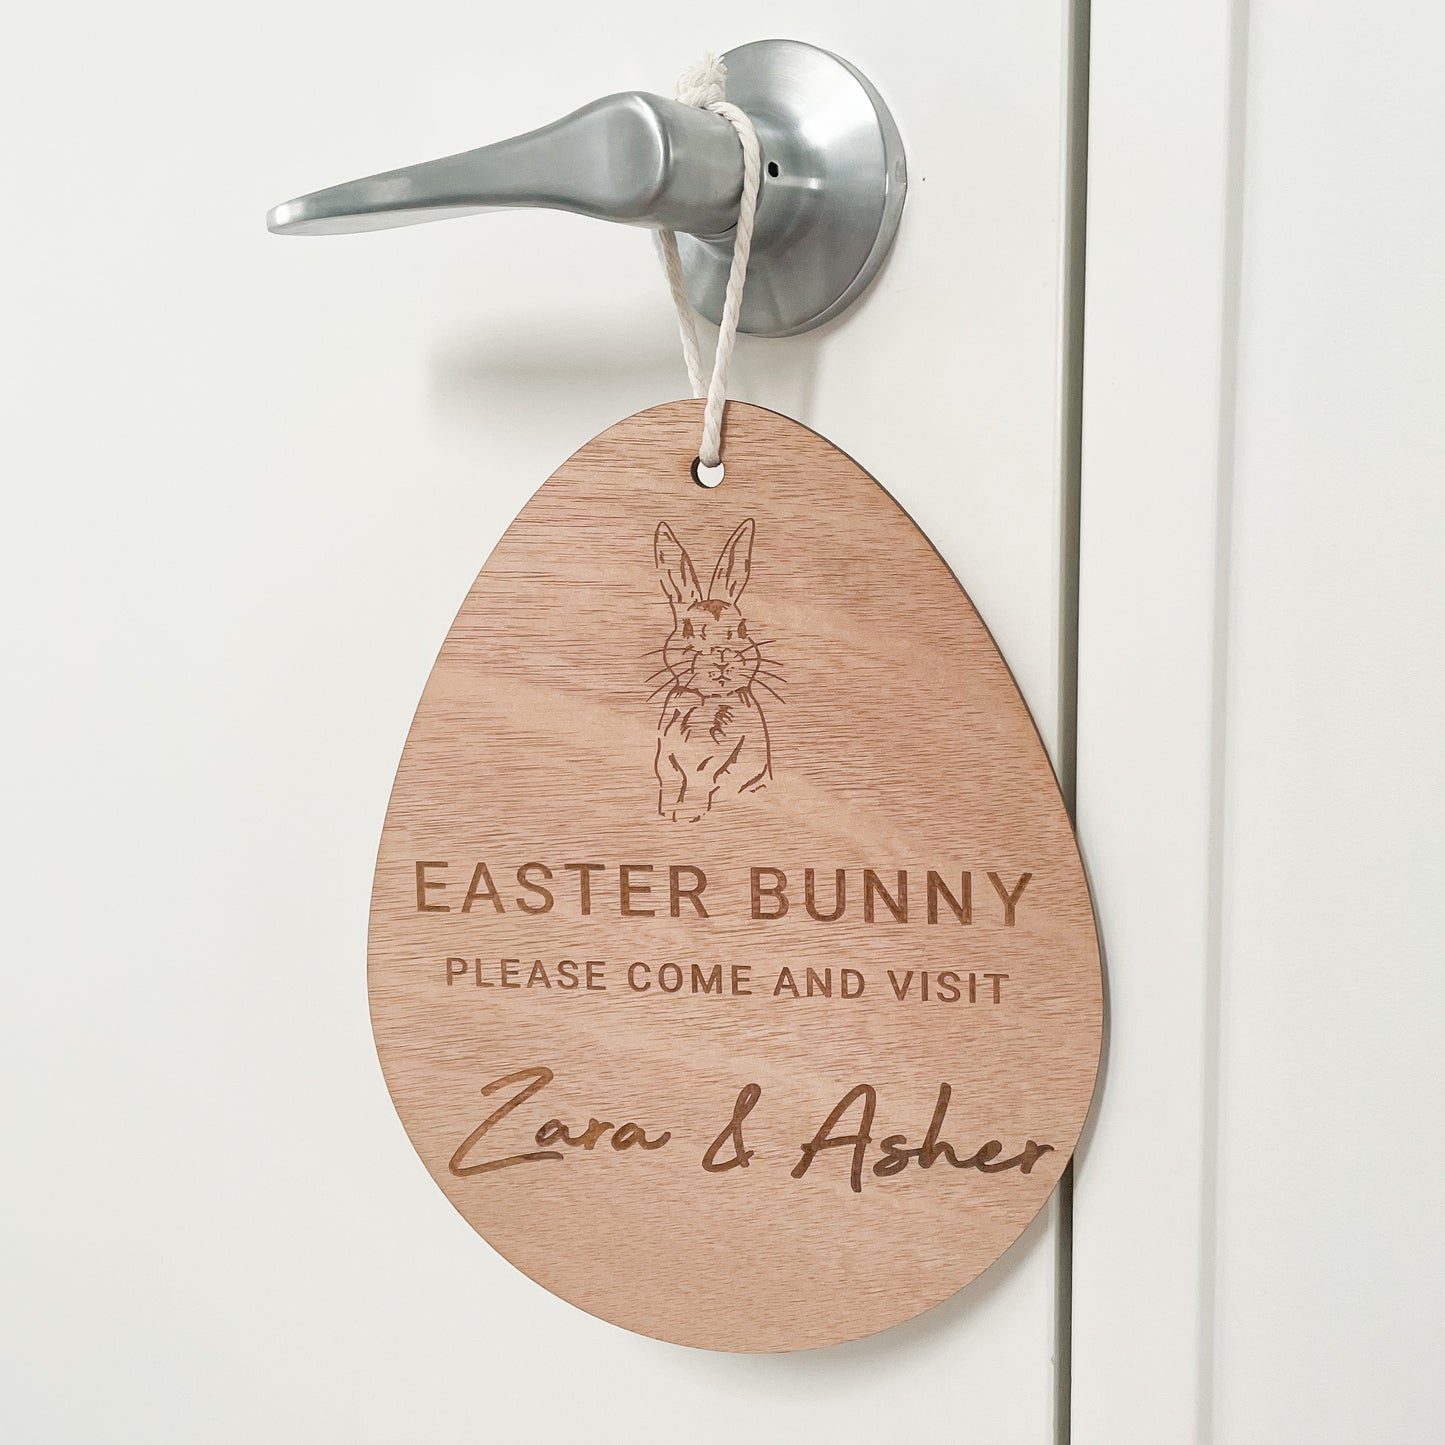 Easter Bunny Plaque - Classic